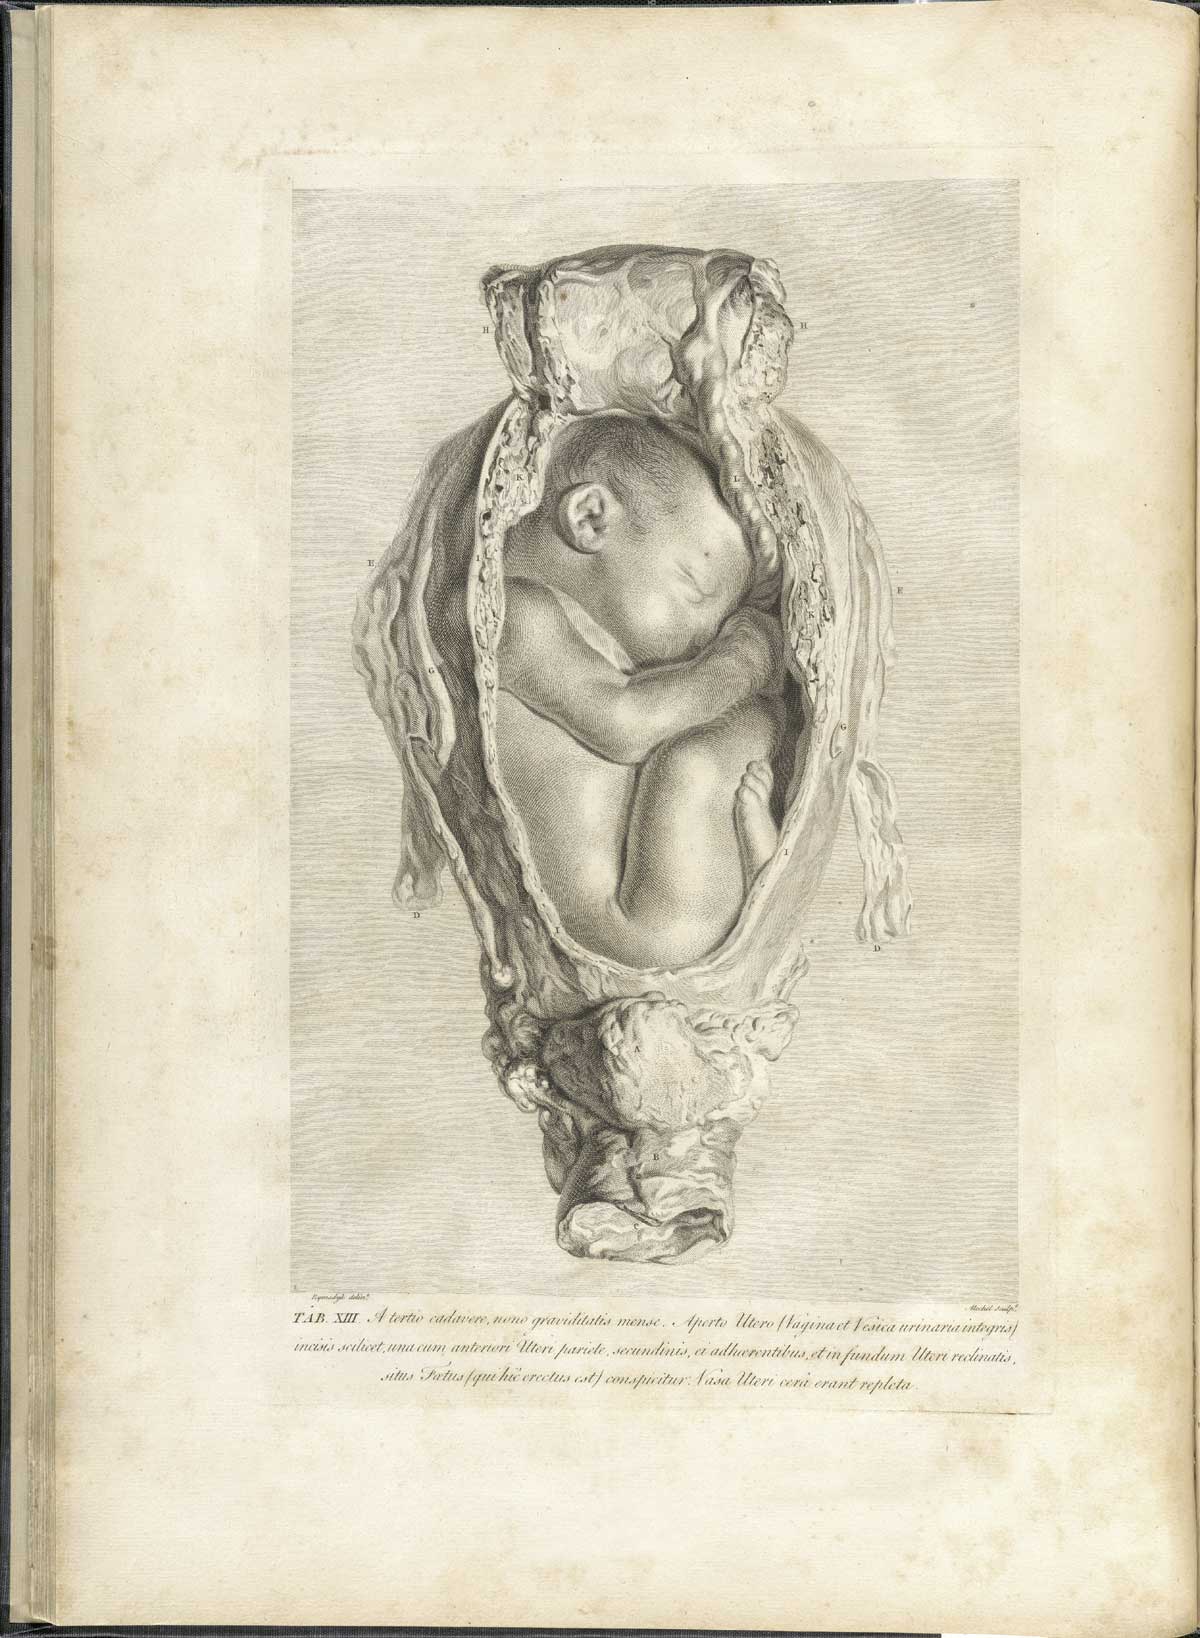 Table 13 of William Hunter's Anatomia uteri humani gravidi tabulis illustrata, featuring the cross section of a detached uterus with a fetus in breech position.